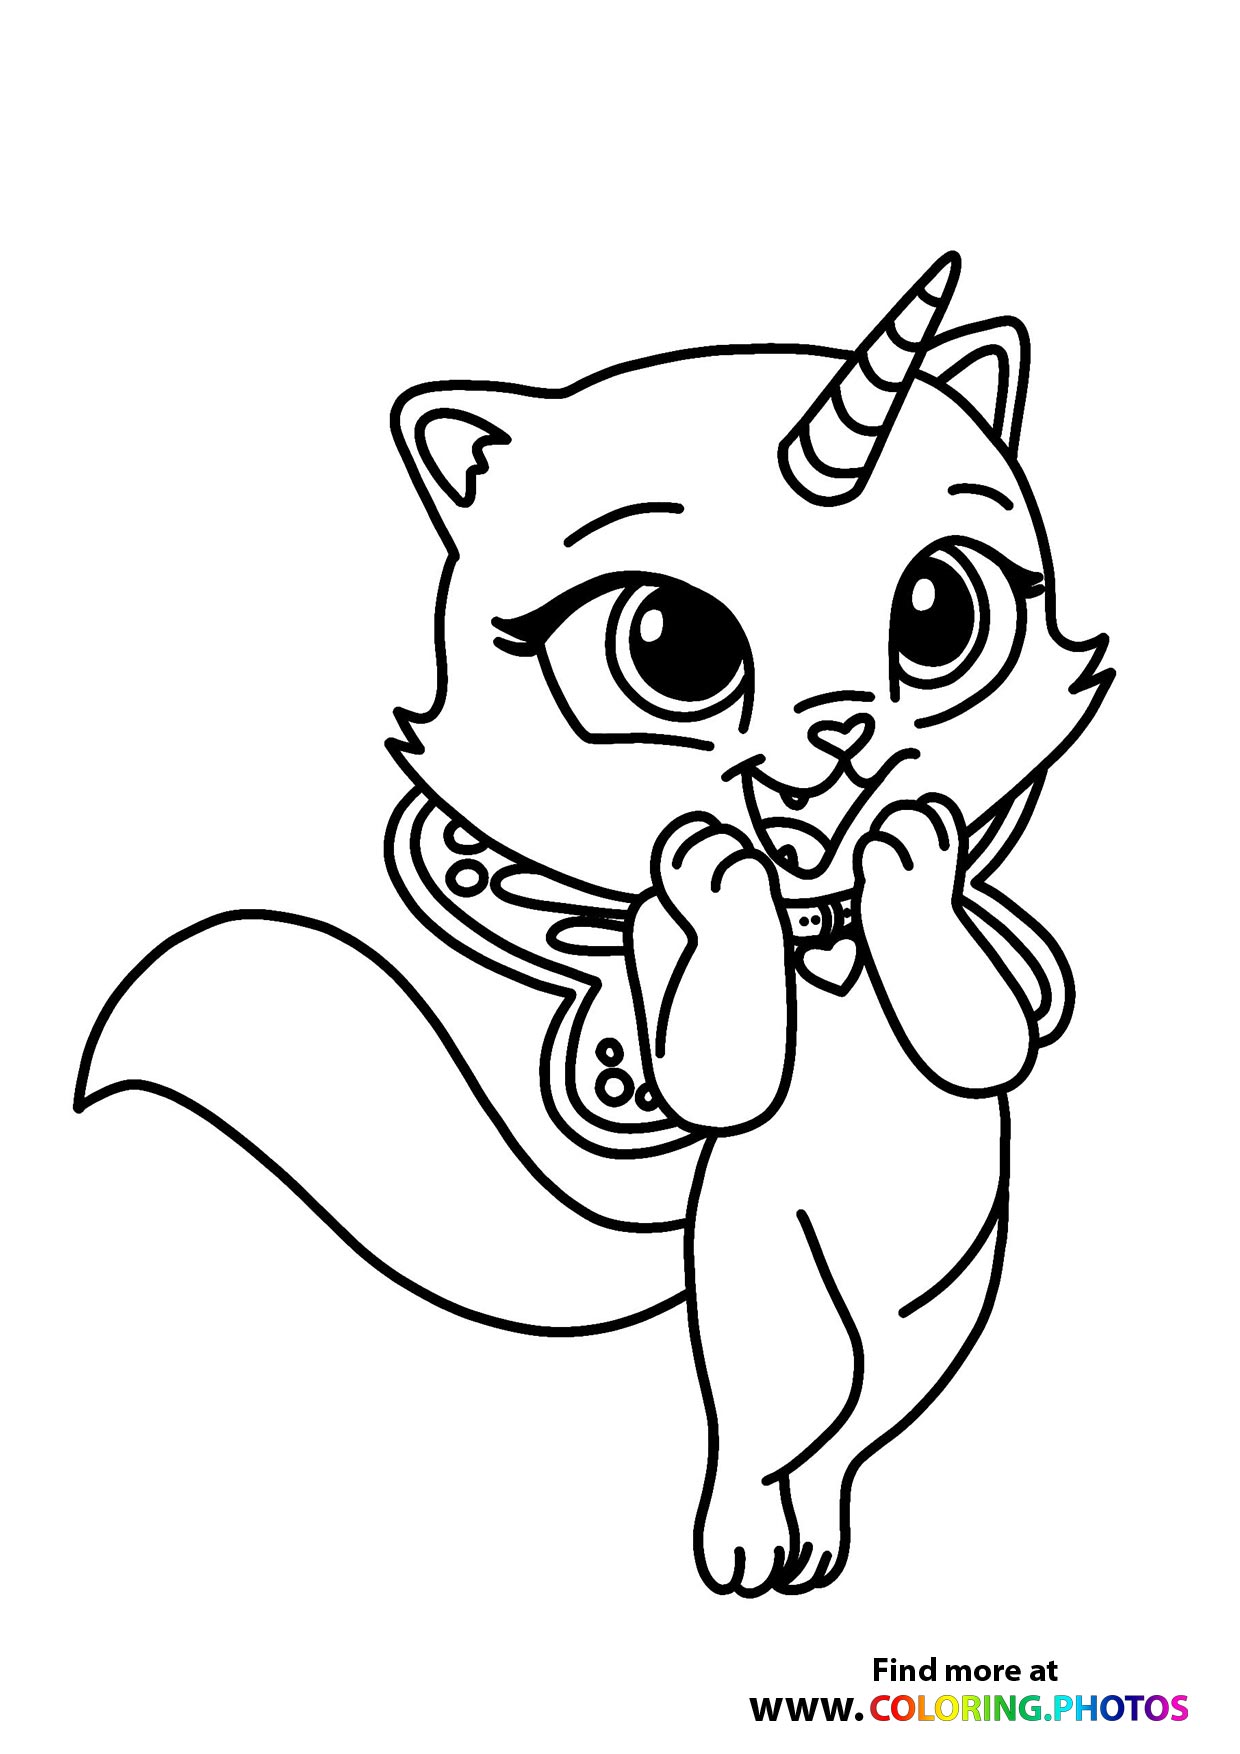 Cat unicorn - Coloring Pages for kids